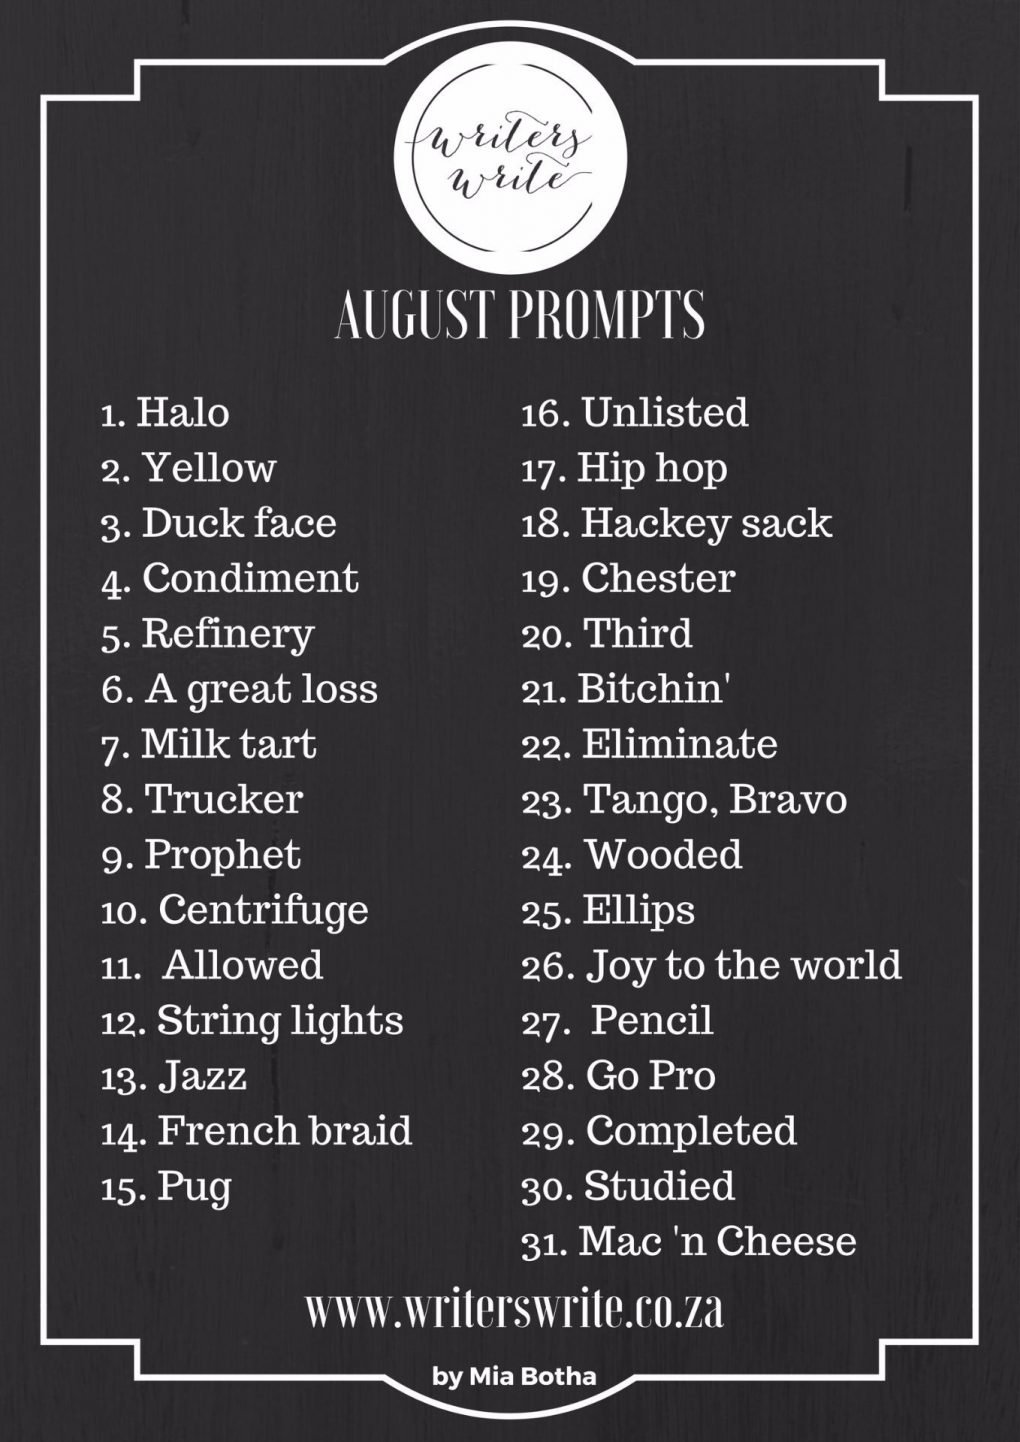 August Prompts